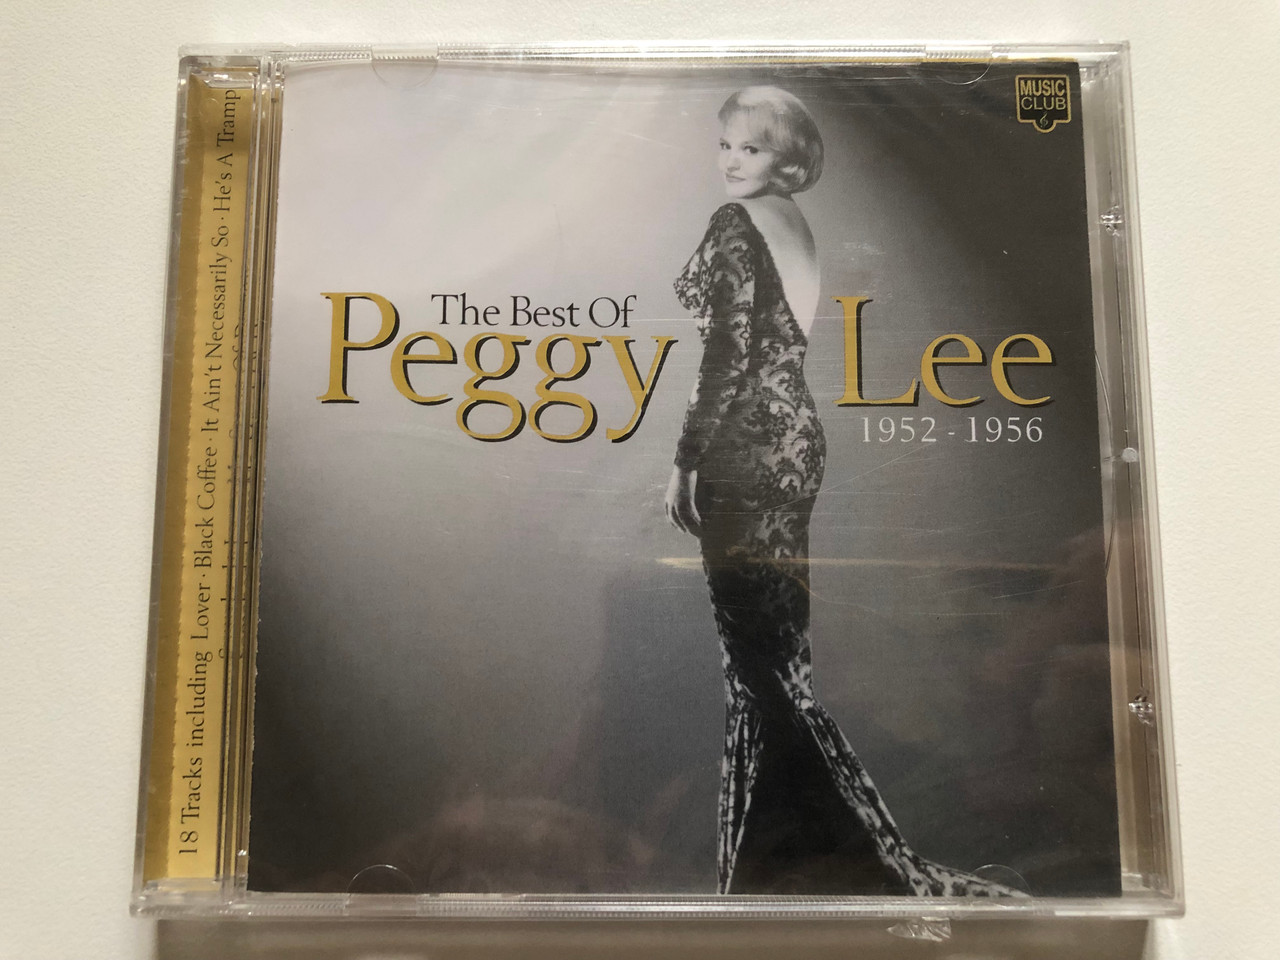 https://cdn10.bigcommerce.com/s-62bdpkt7pb/products/0/images/311243/The_Best_Of_Peggy_Lee_1952-1956_Music_Club_Audio_CD_2000_MCCD_426_1__04692.1699544178.1280.1280.JPG?c=2